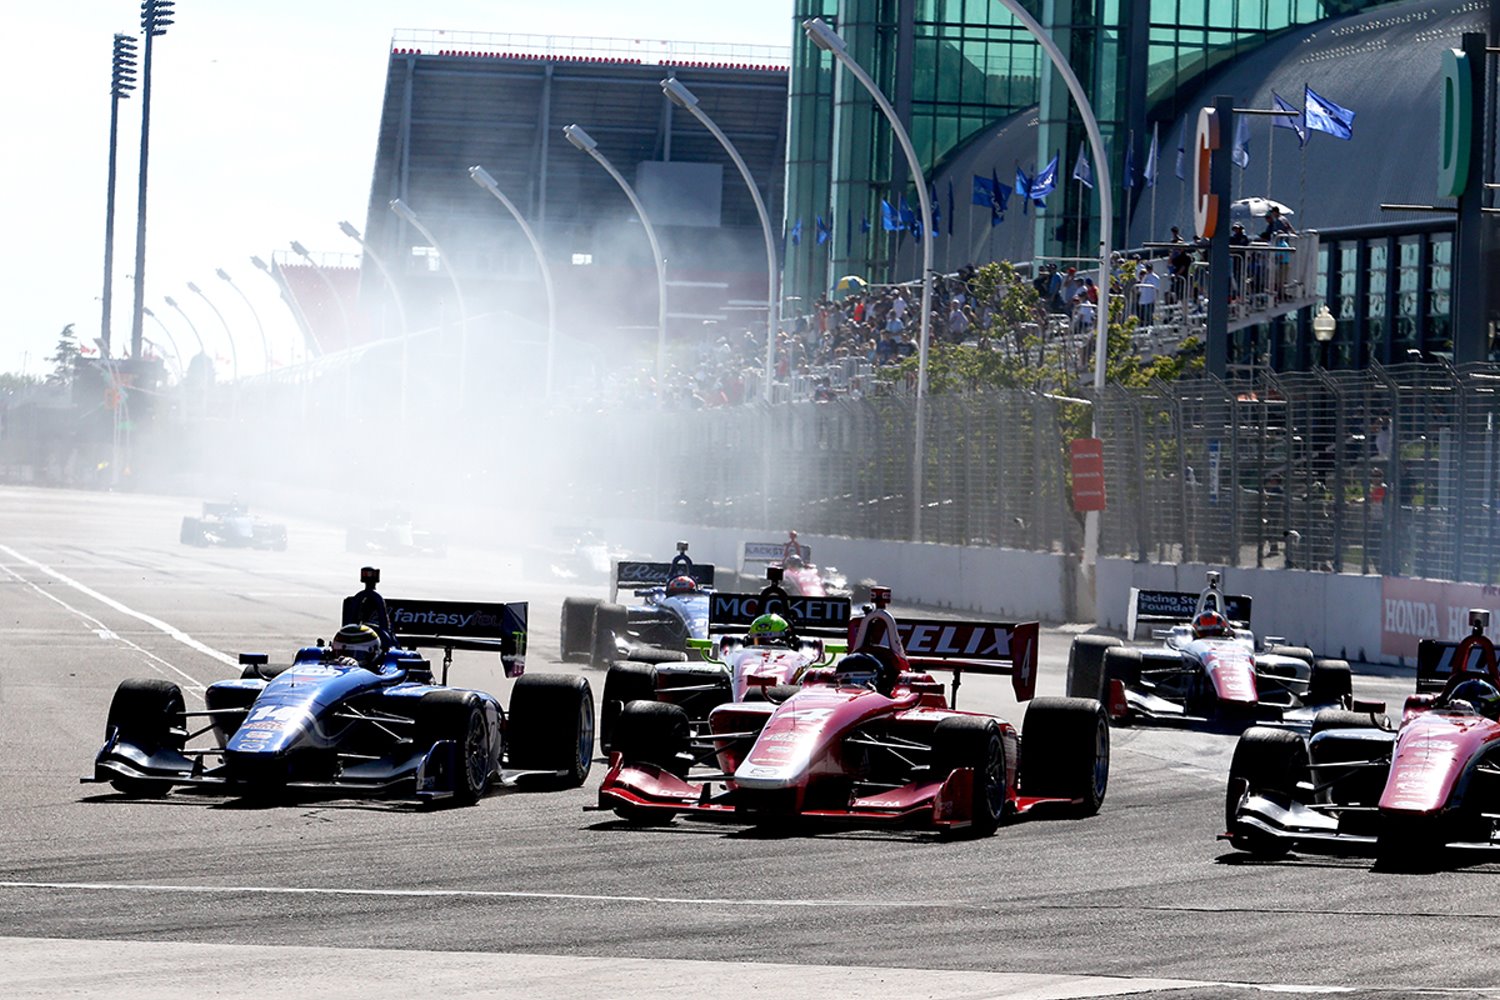 The Indy Lights start was exciting. The same cannot be said about the IndyCar start, but it was safe